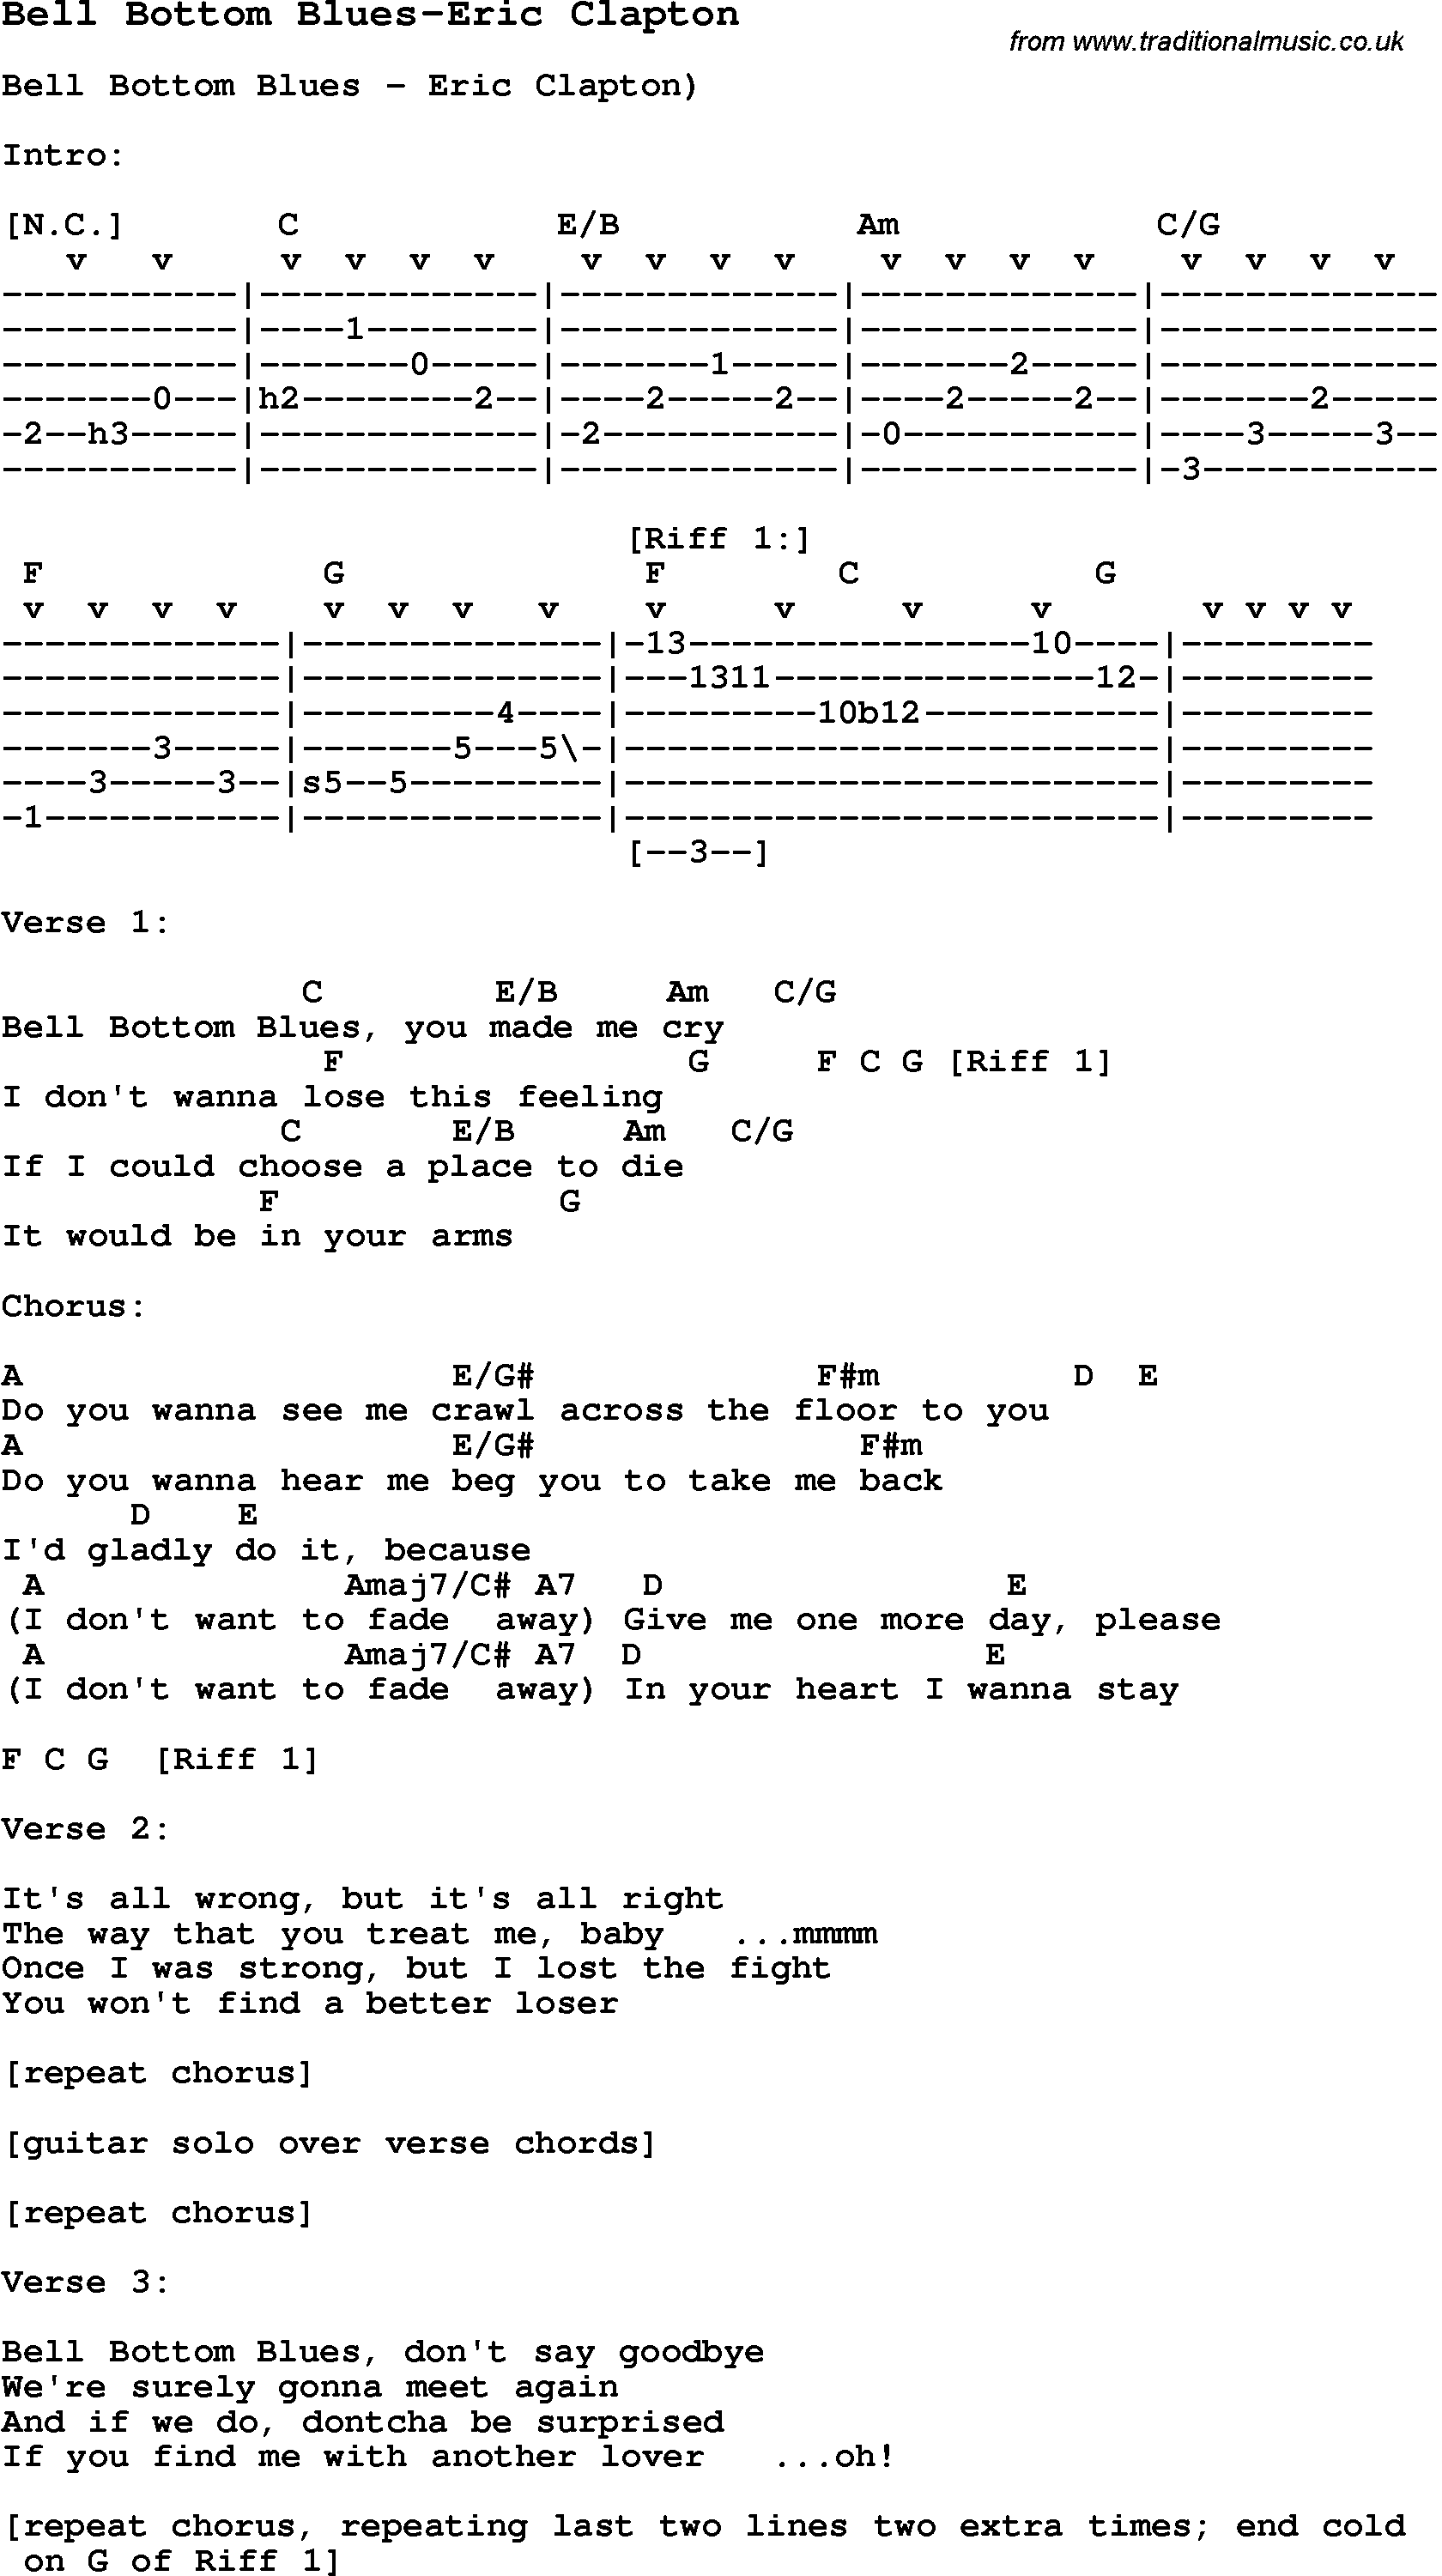 Blues Guitar Song, lyrics, chords, tablature, playing hints for Bell Bottom Blues-Eric Clapton